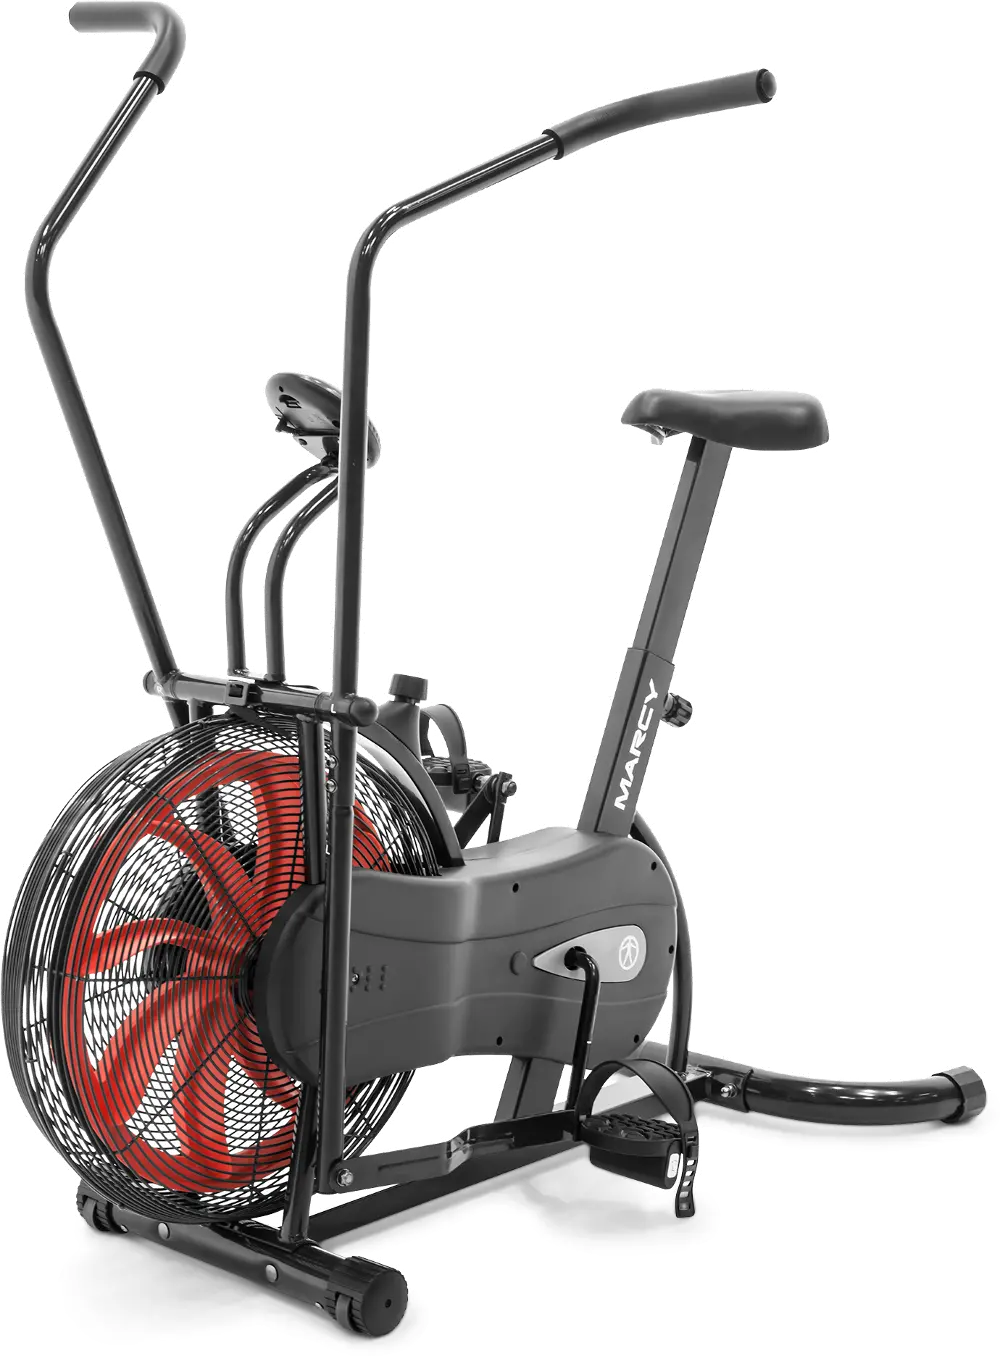 NS-1000 Marcy Black and Red Fan Exercise Bike-1